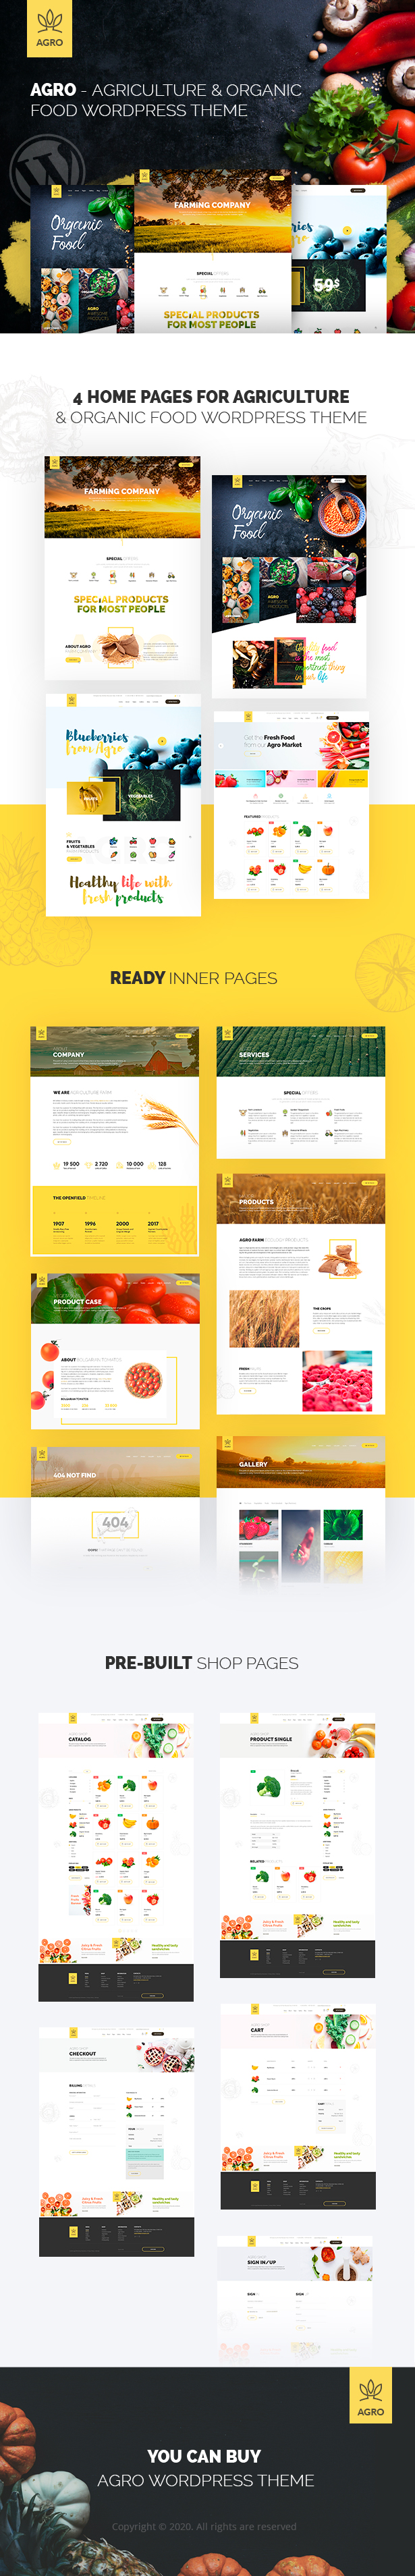 agro preview page wp - Agro - Organic Farm Agriculture WordPress Theme